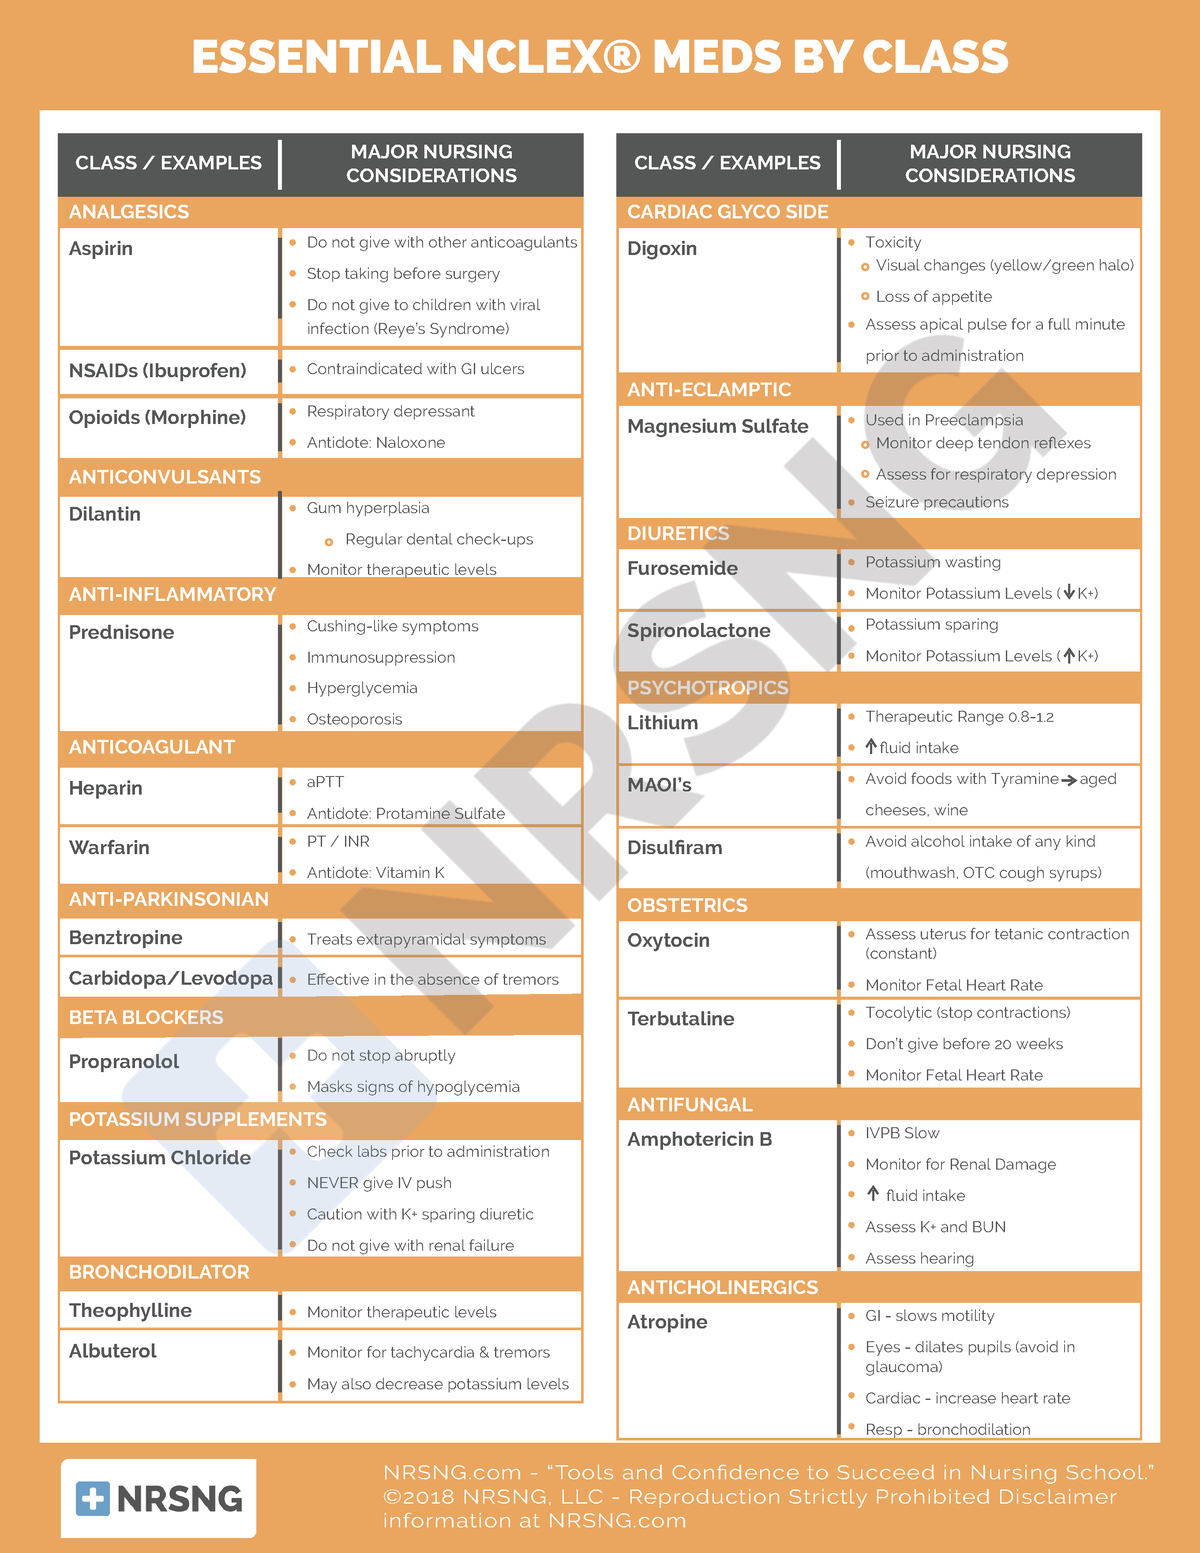 Cs-pharm-021-essential nclex meds by class - NRSNG - “Tools and ...